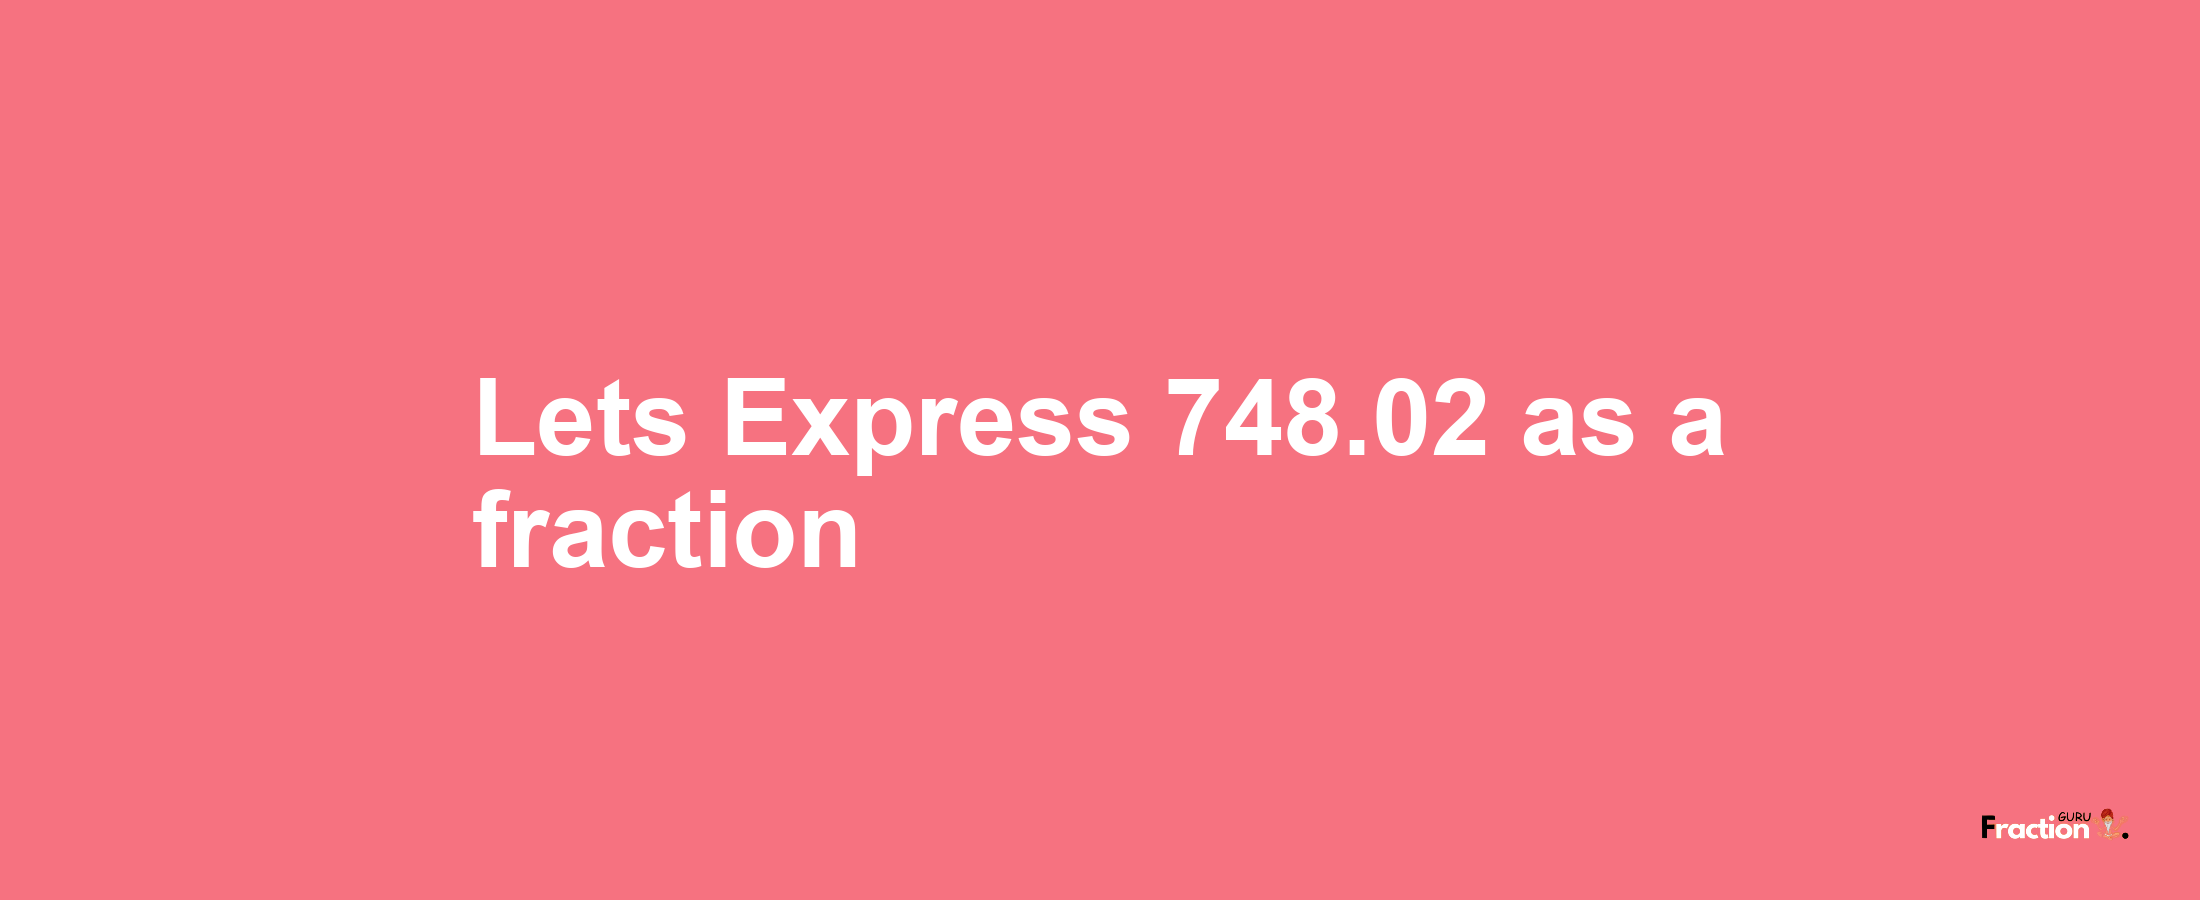 Lets Express 748.02 as afraction